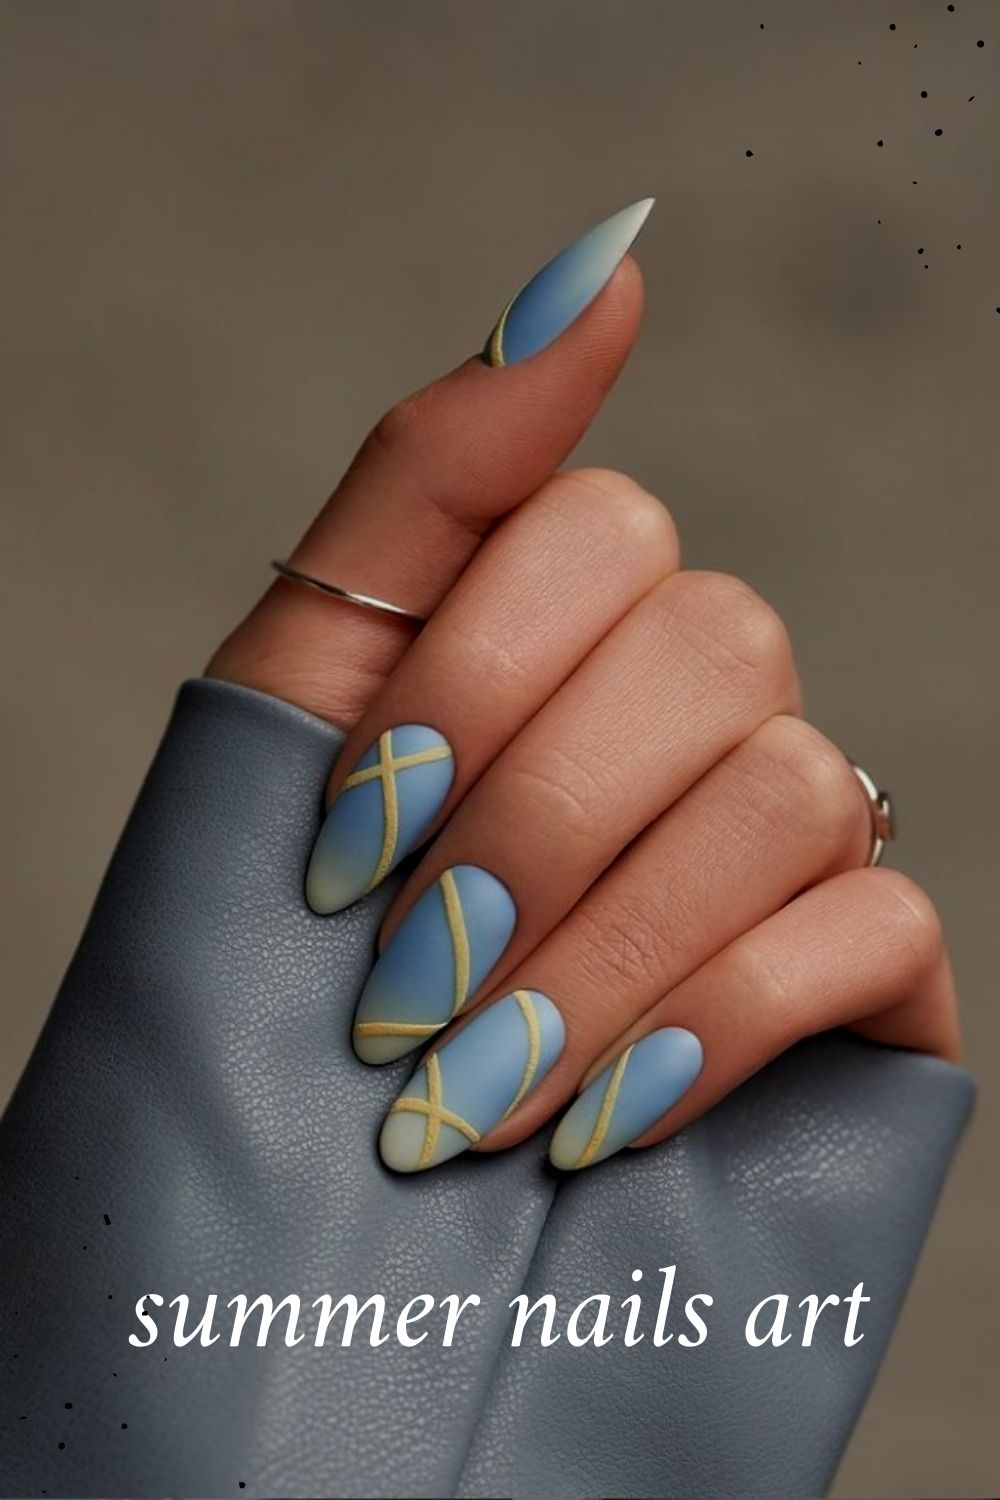 Blue and yellow almond nails for summer nails art